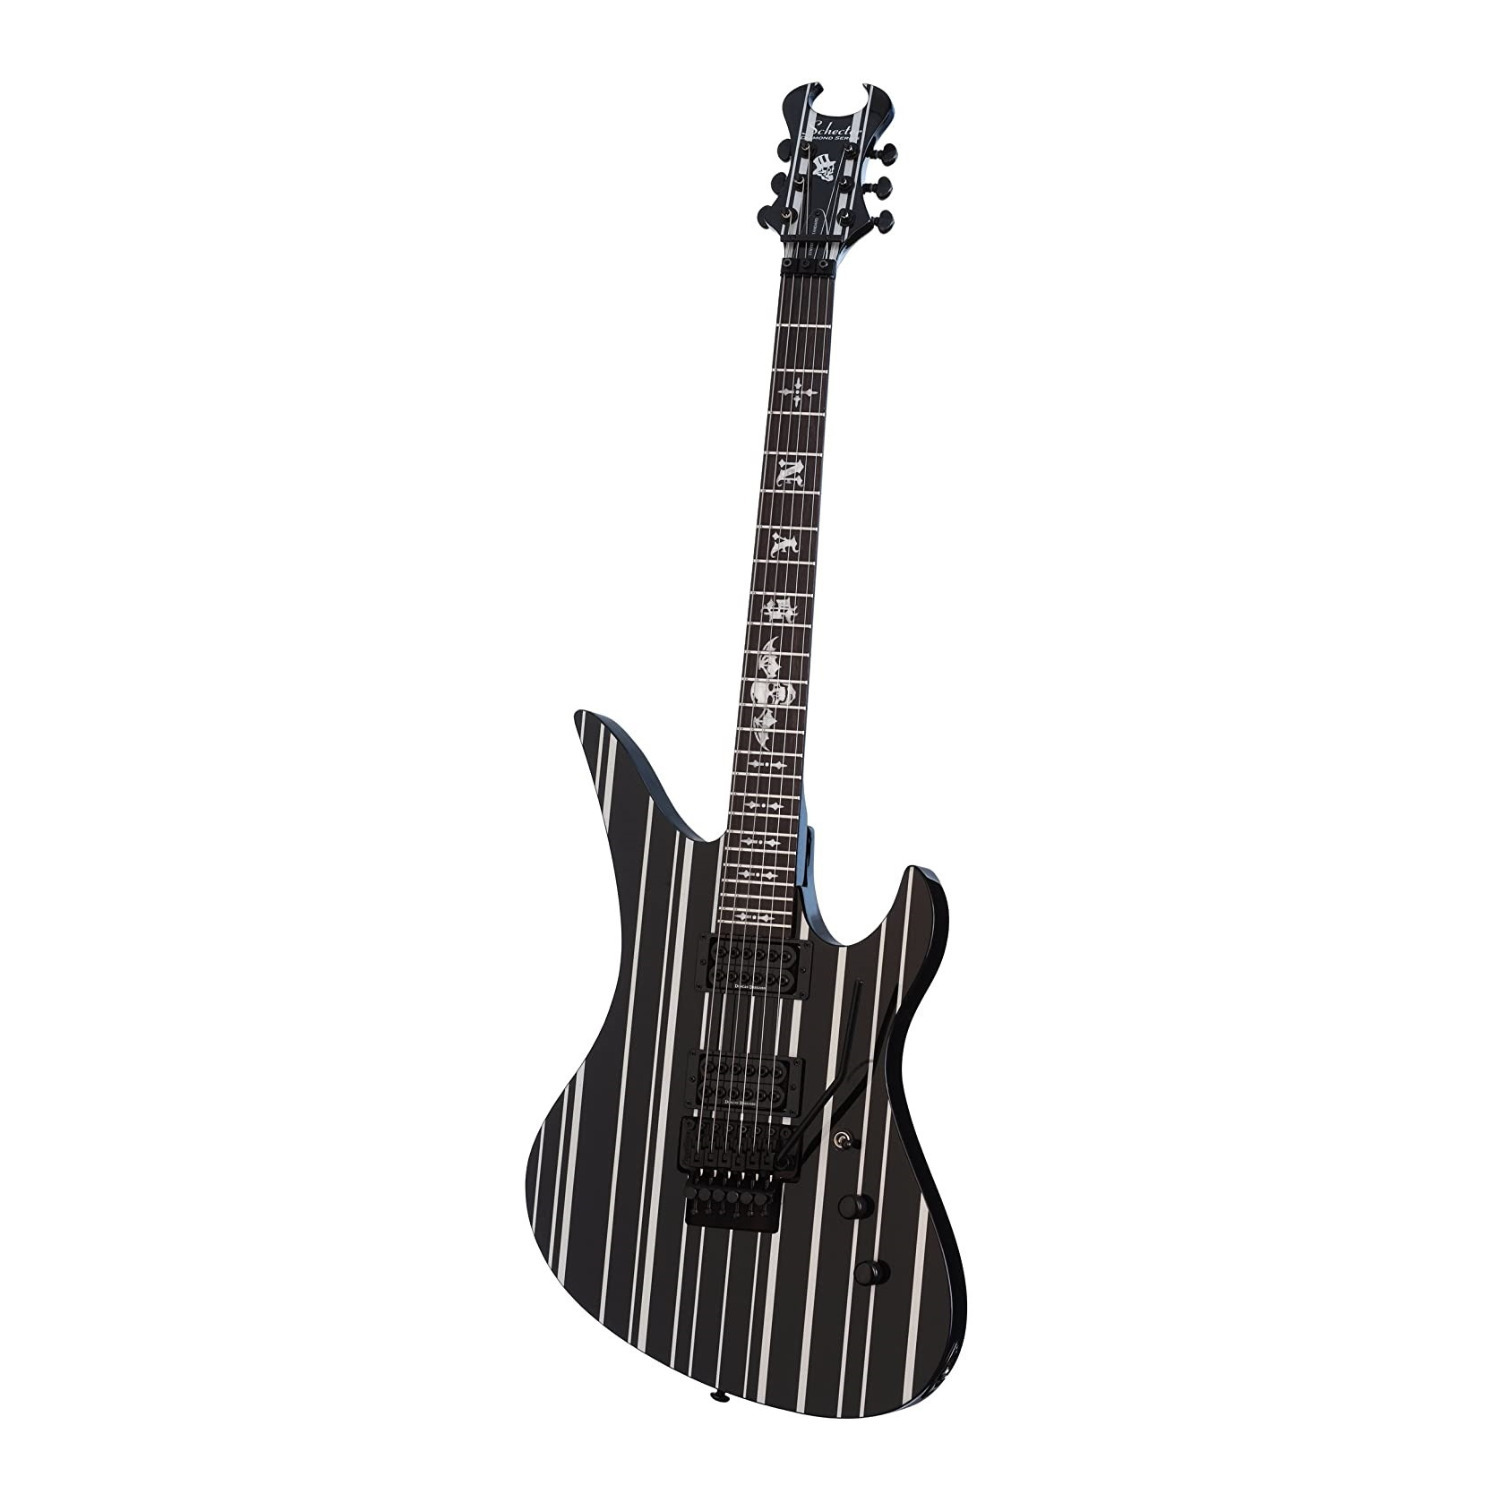 Schecter Synyster Gates Standard 6-String Electric Guitar (Gloss Black) -  1739